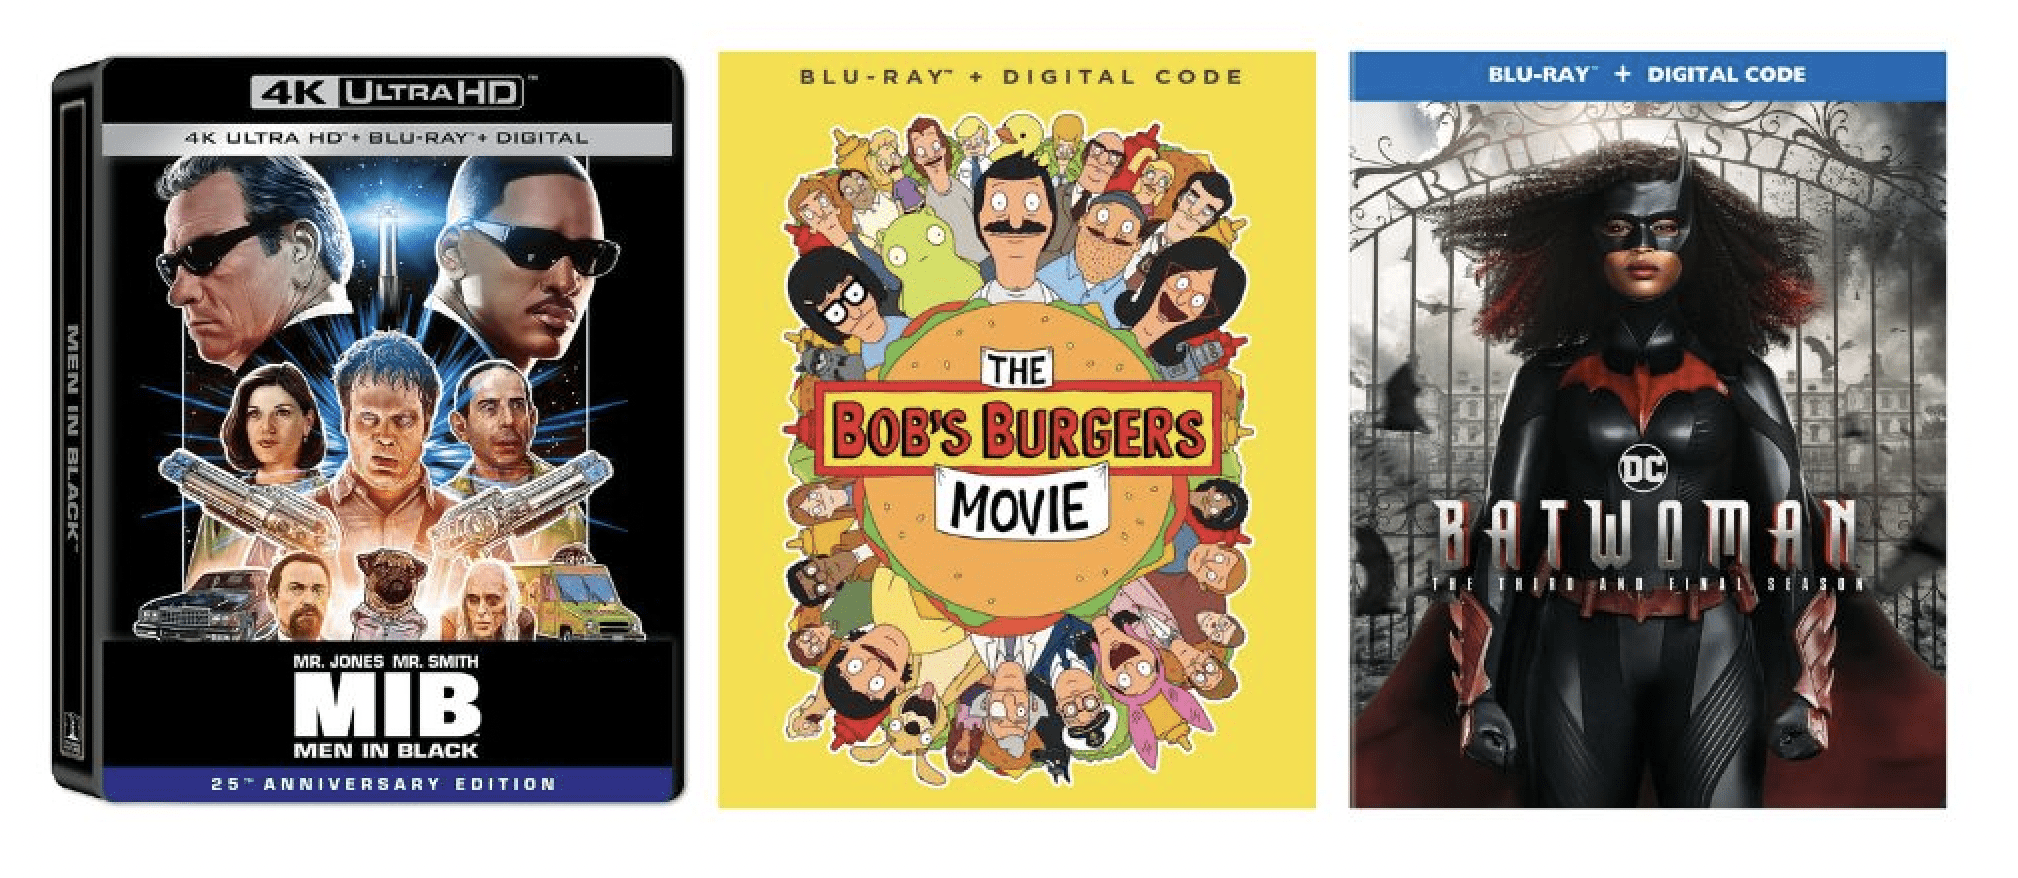 What's New on Home Video - July 19, 2022 - Bob's Burgers, Men In Black,  Batwoman, Reno 911, Yellowjackets, & More! - Comic Watch